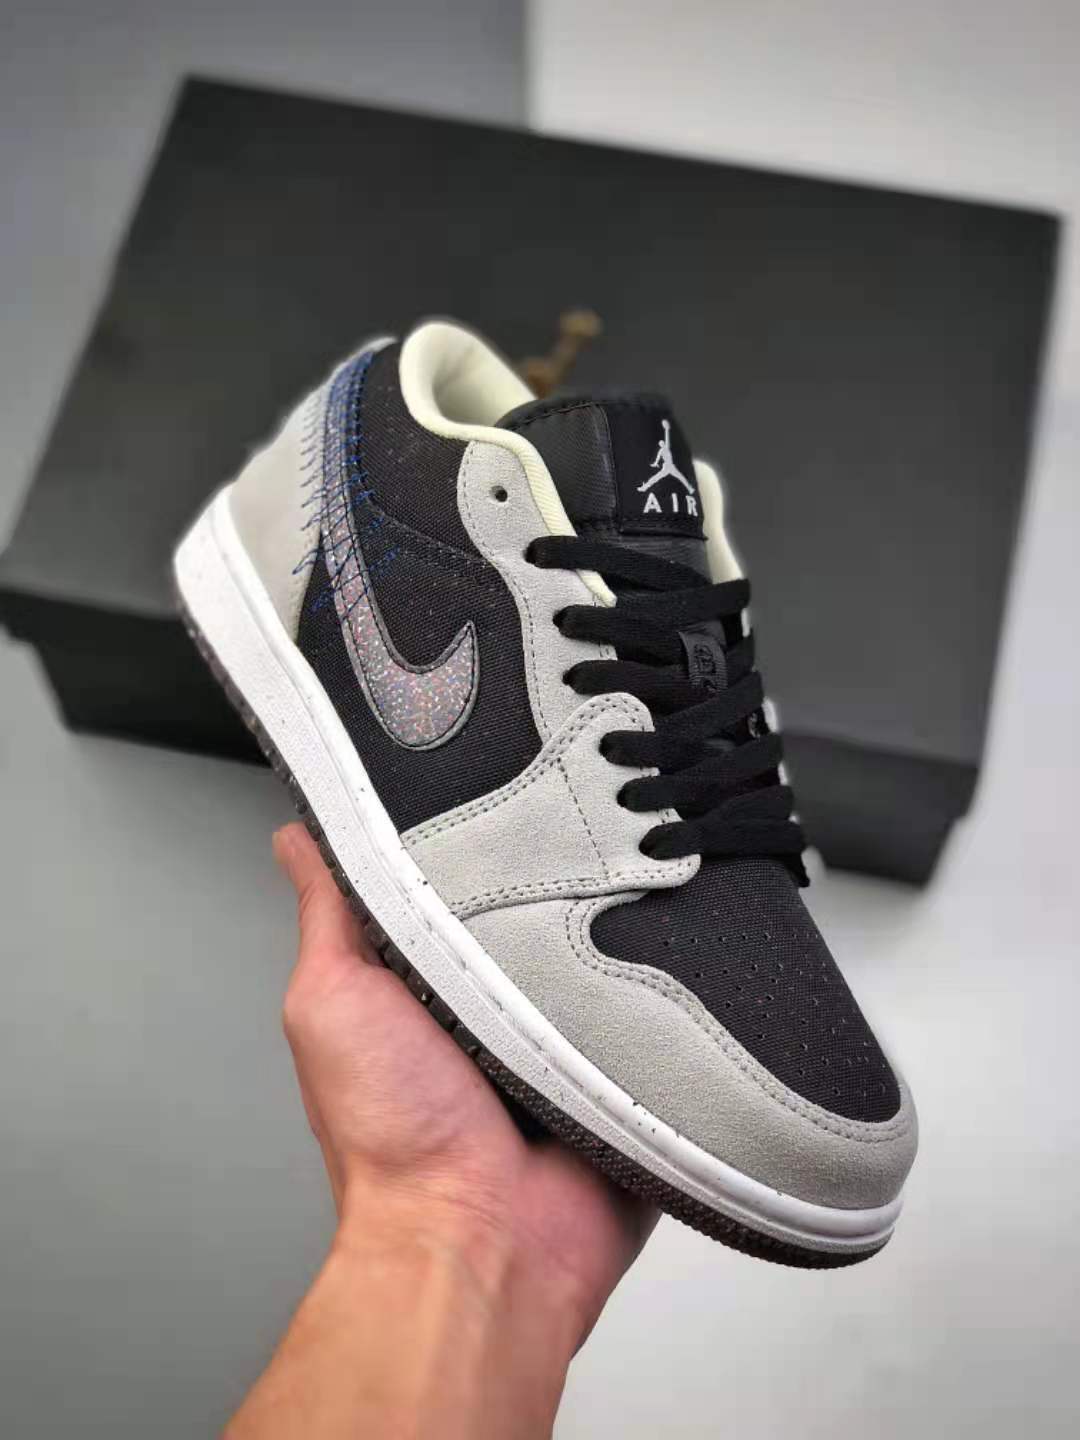 Air Jordan 1 Low 'Crater' DM4657-001 - Stylish and Sustainable Footwear